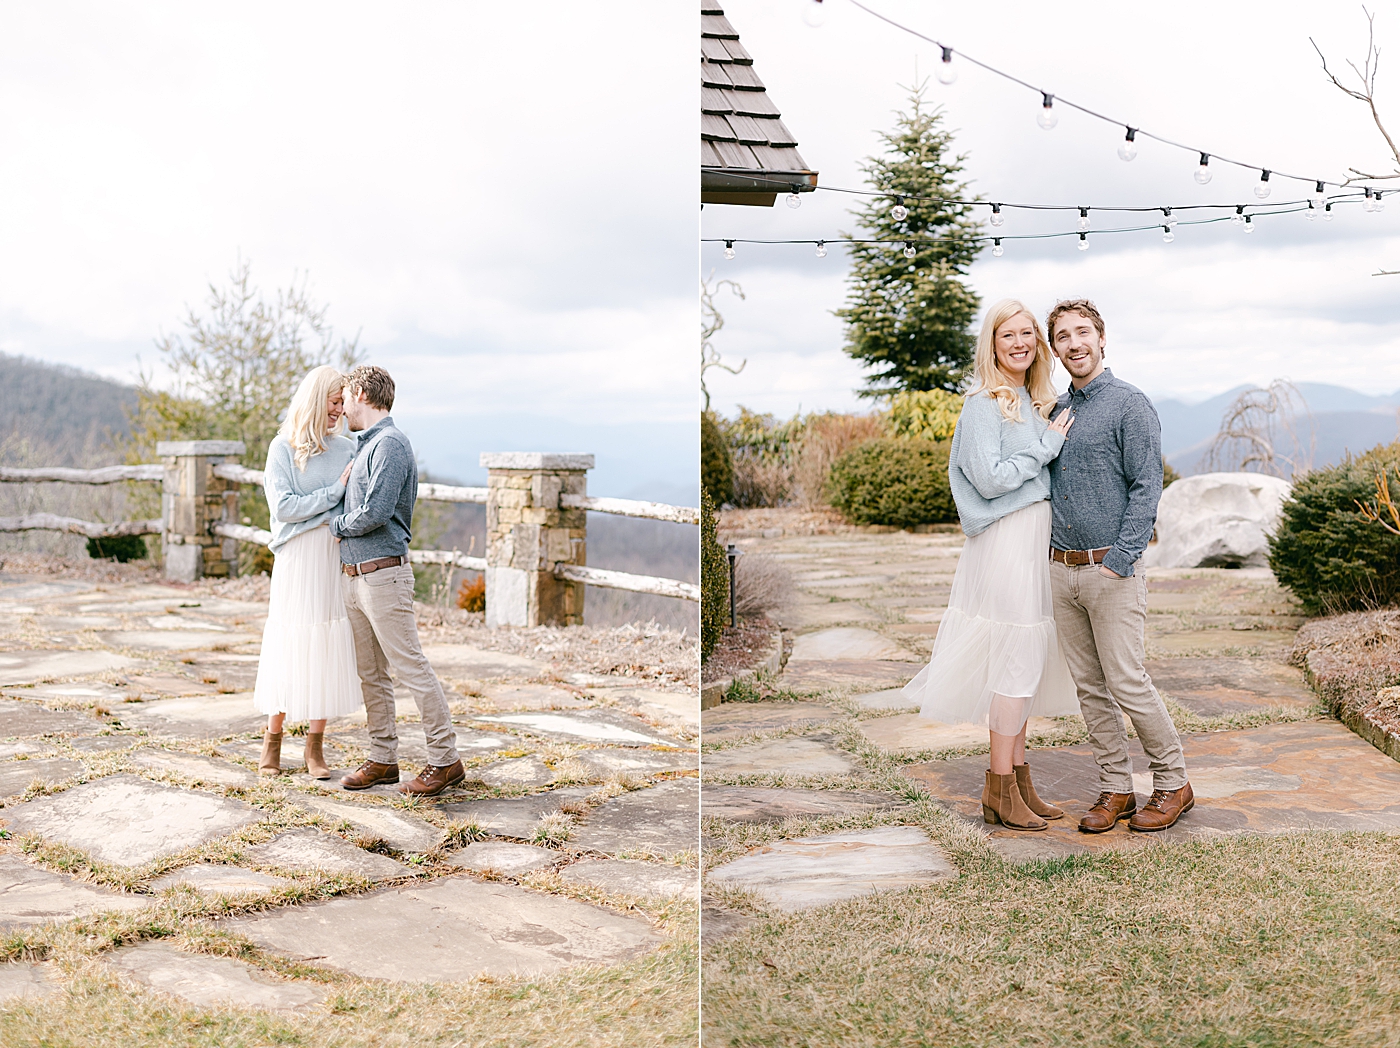 Couple snuggling during their engagement photos | Image by Hope Helmuth Photography